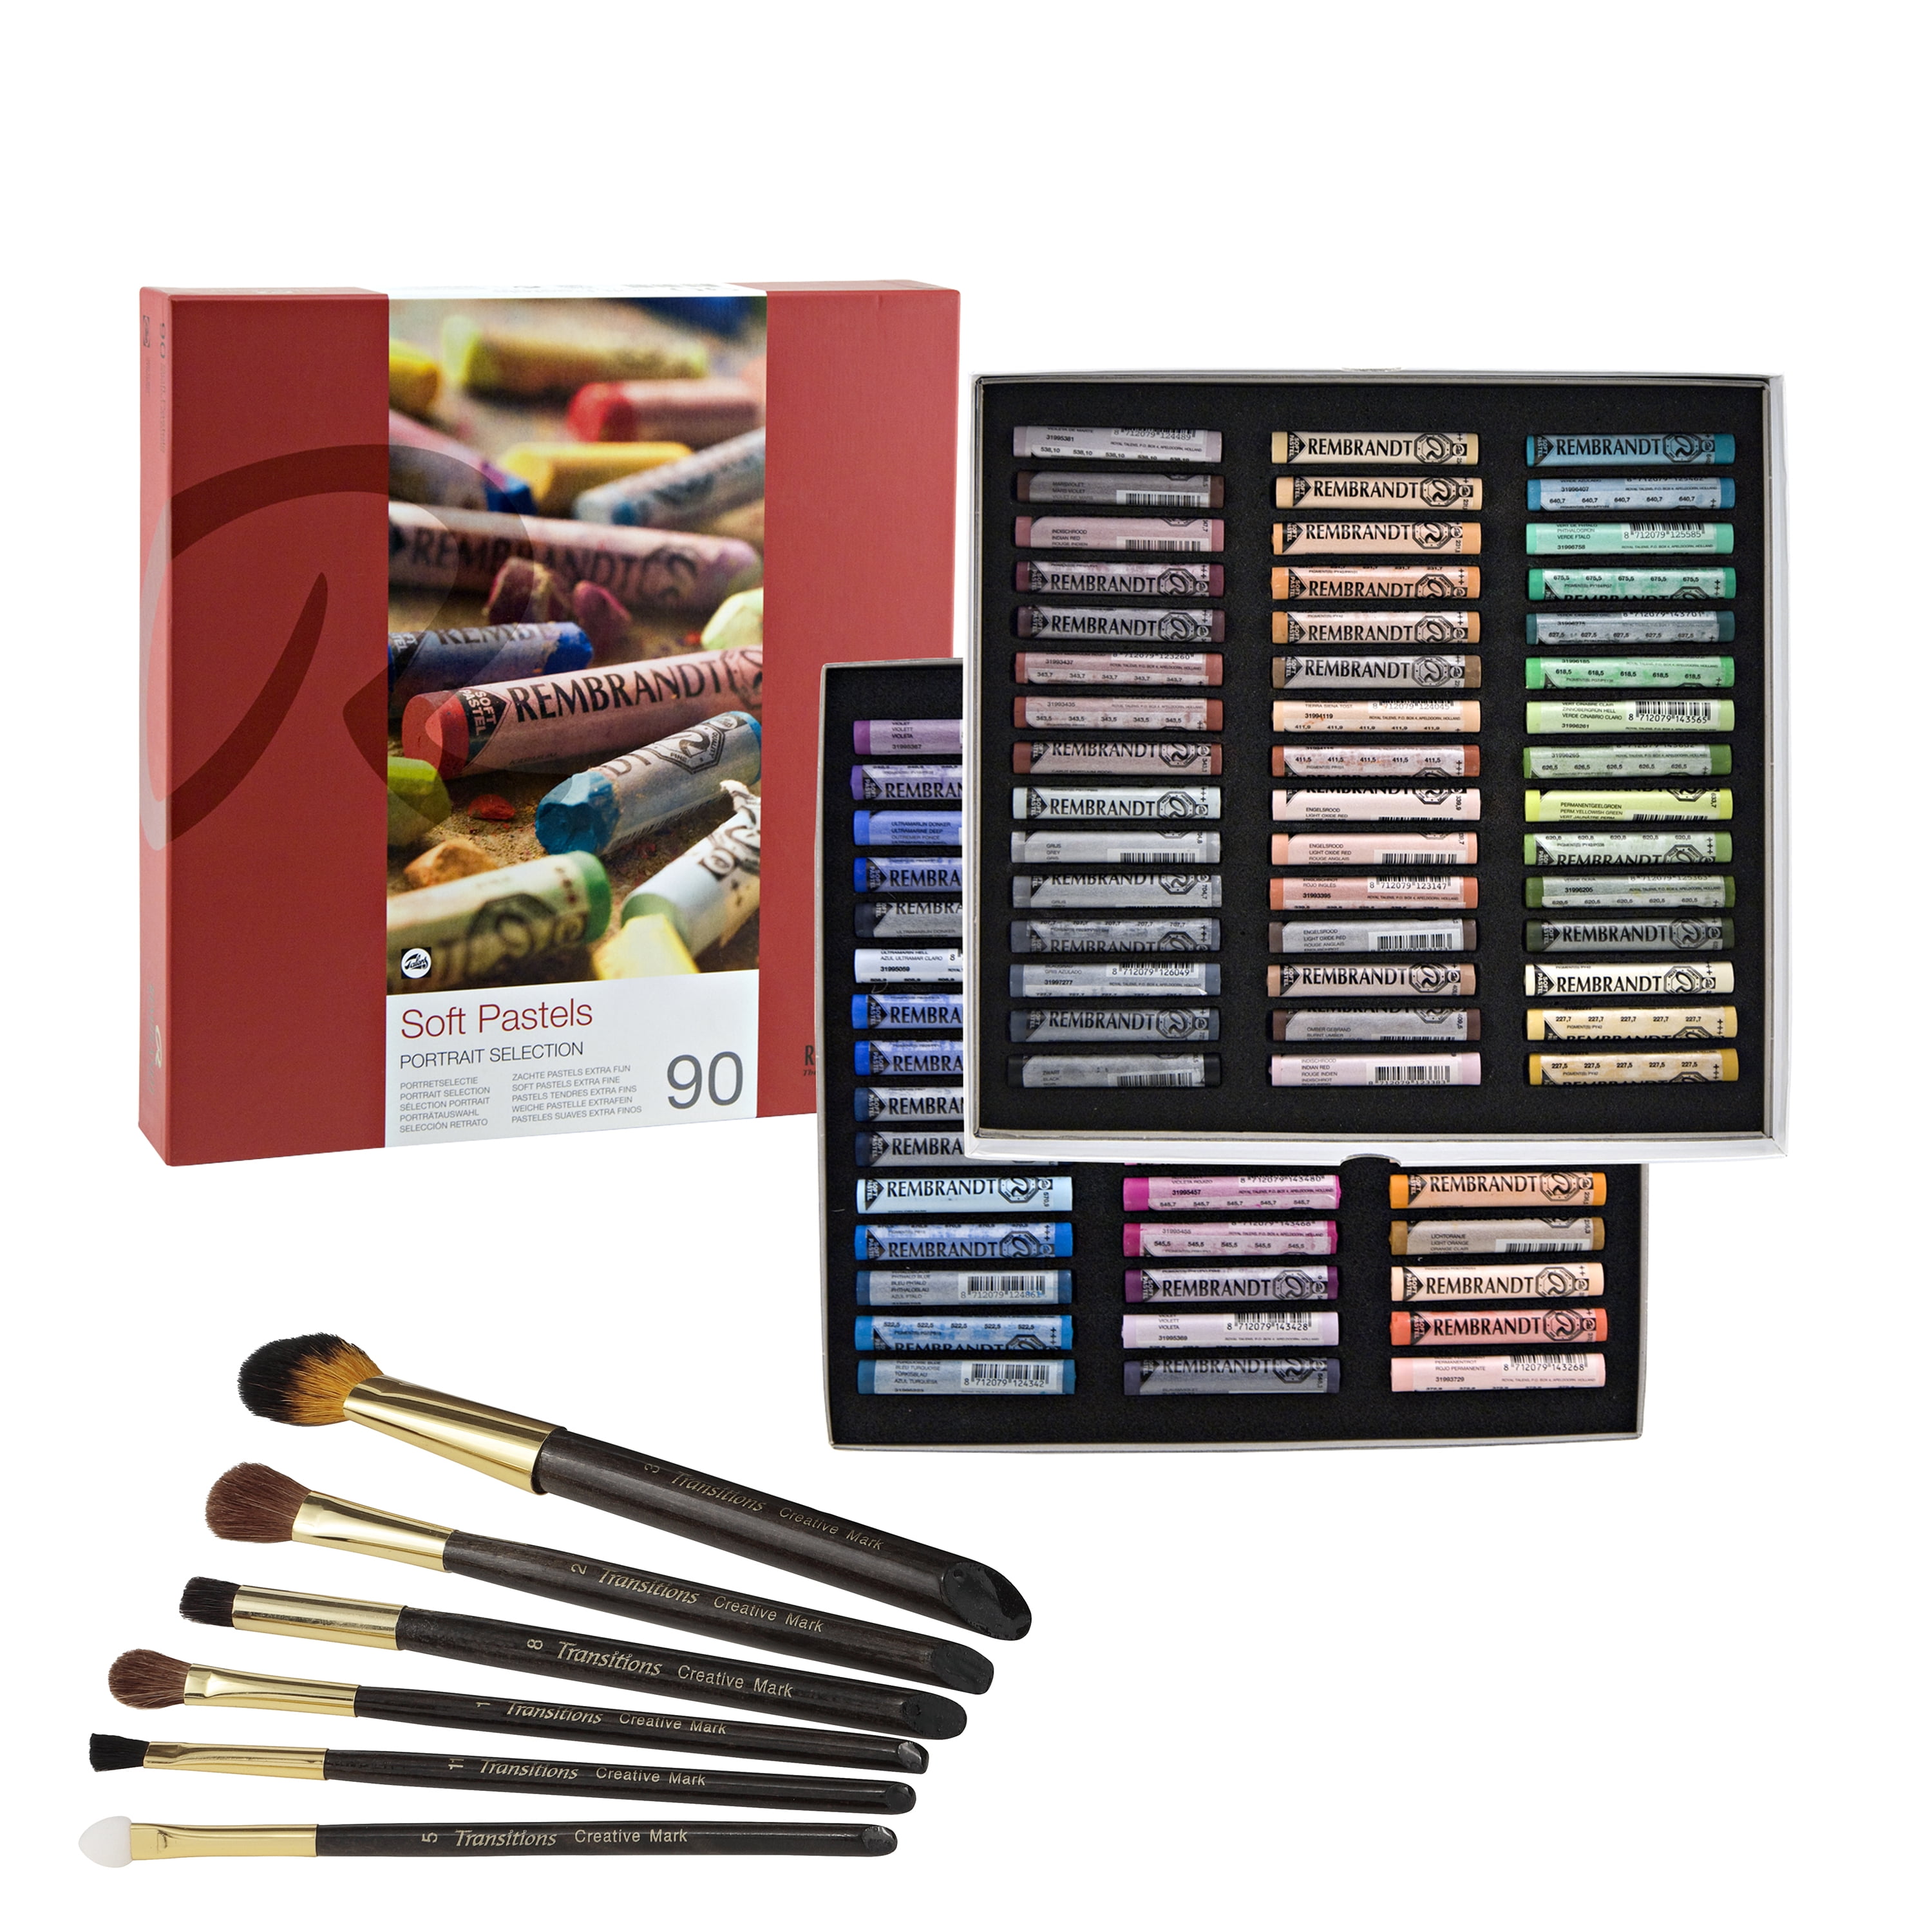 Faber-Castell professional art supplies - Rave & Review